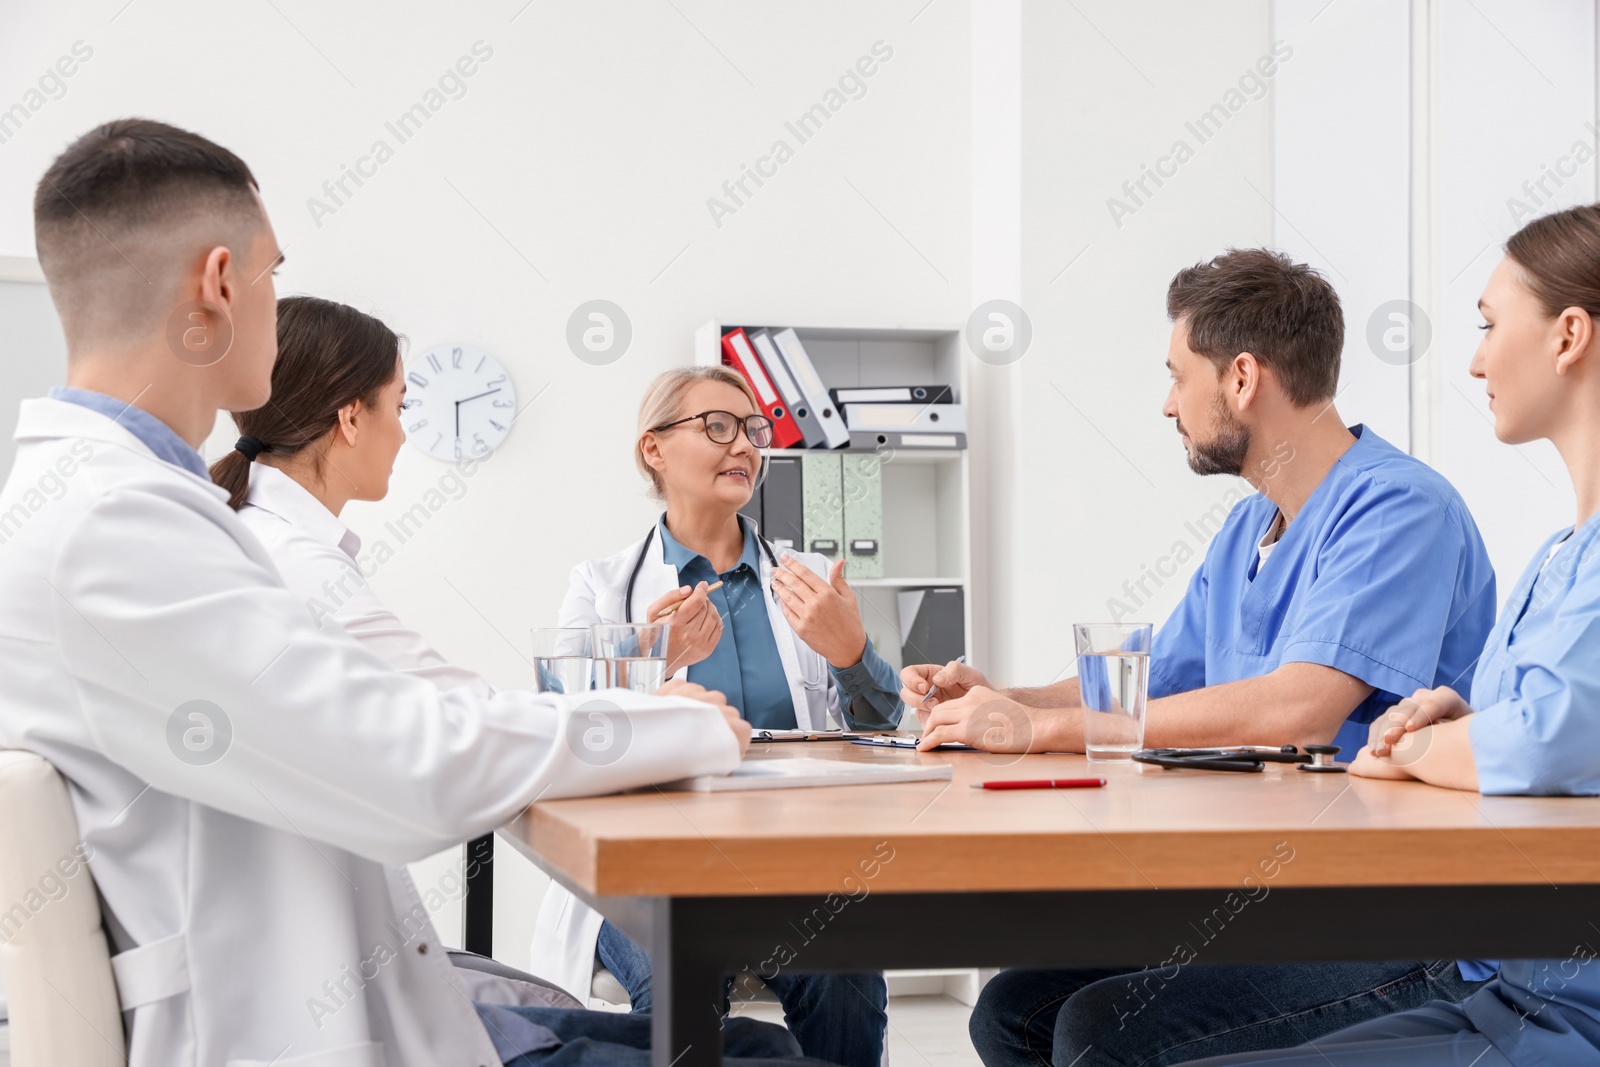 Photo of Medical conference. Team of doctors having discussion with speaker at wooden table in clinic